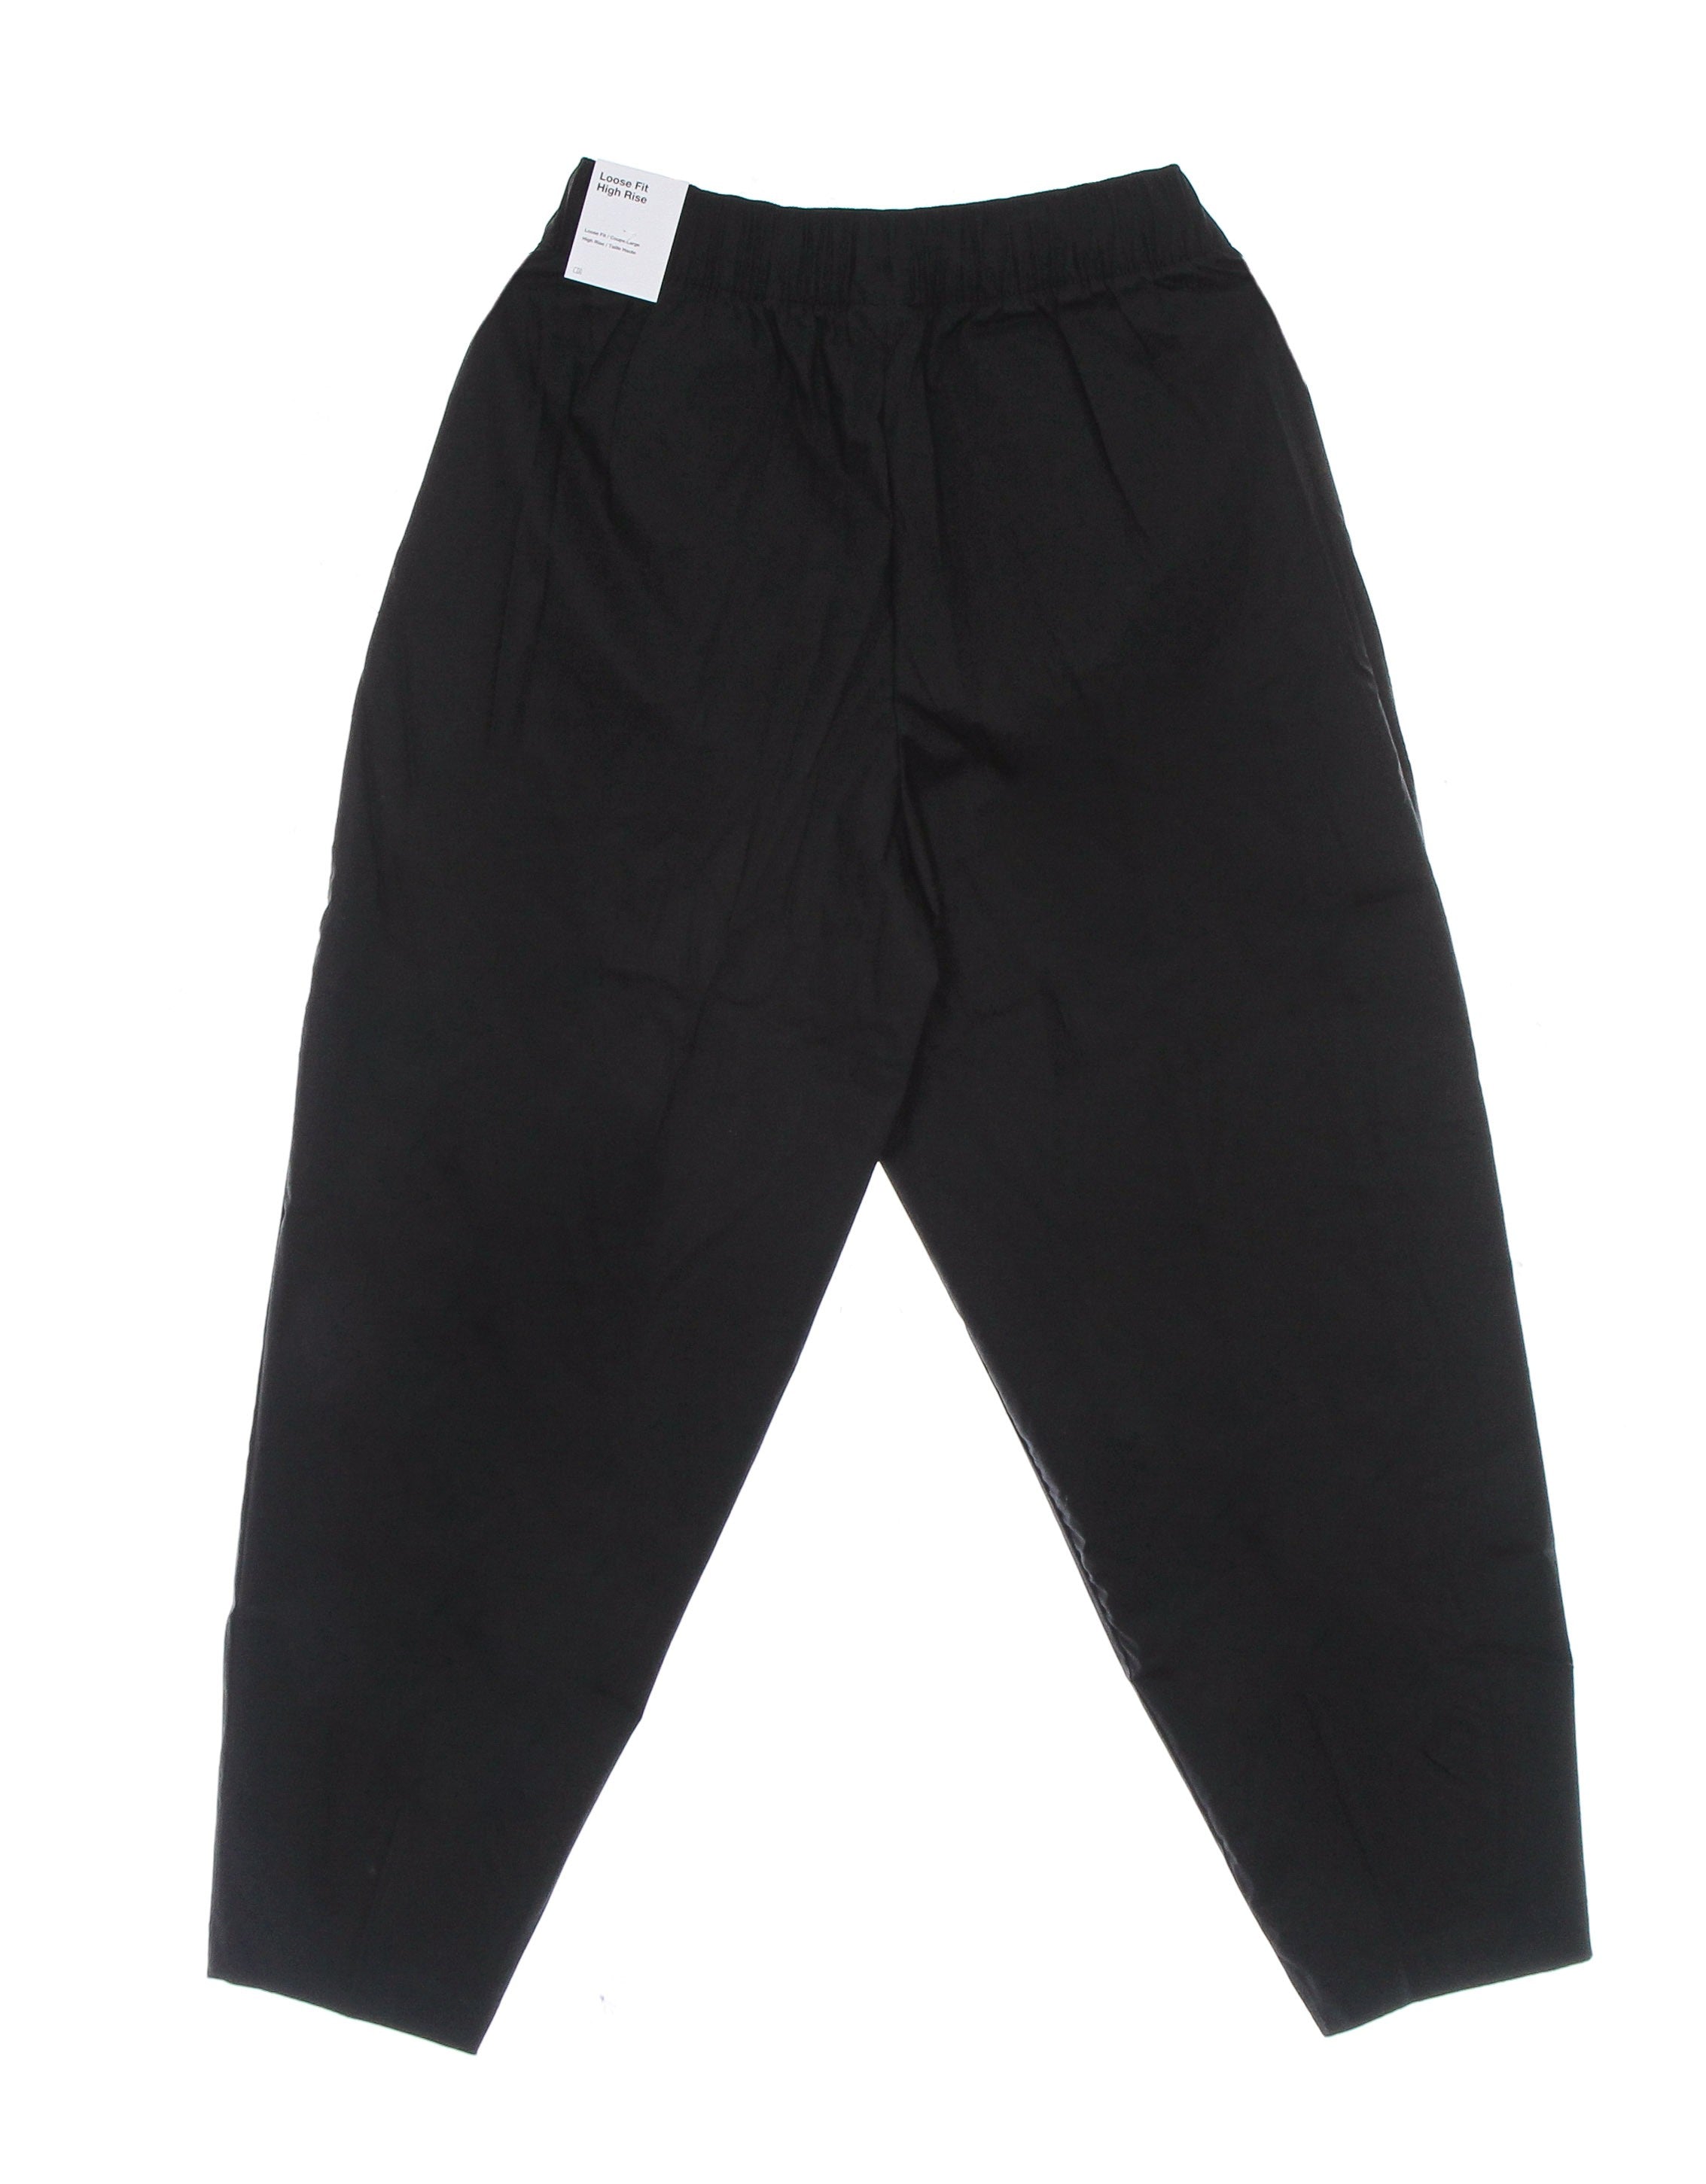 Nike, Pantalone Lungo Donna Essential Woven Hr Pant, 